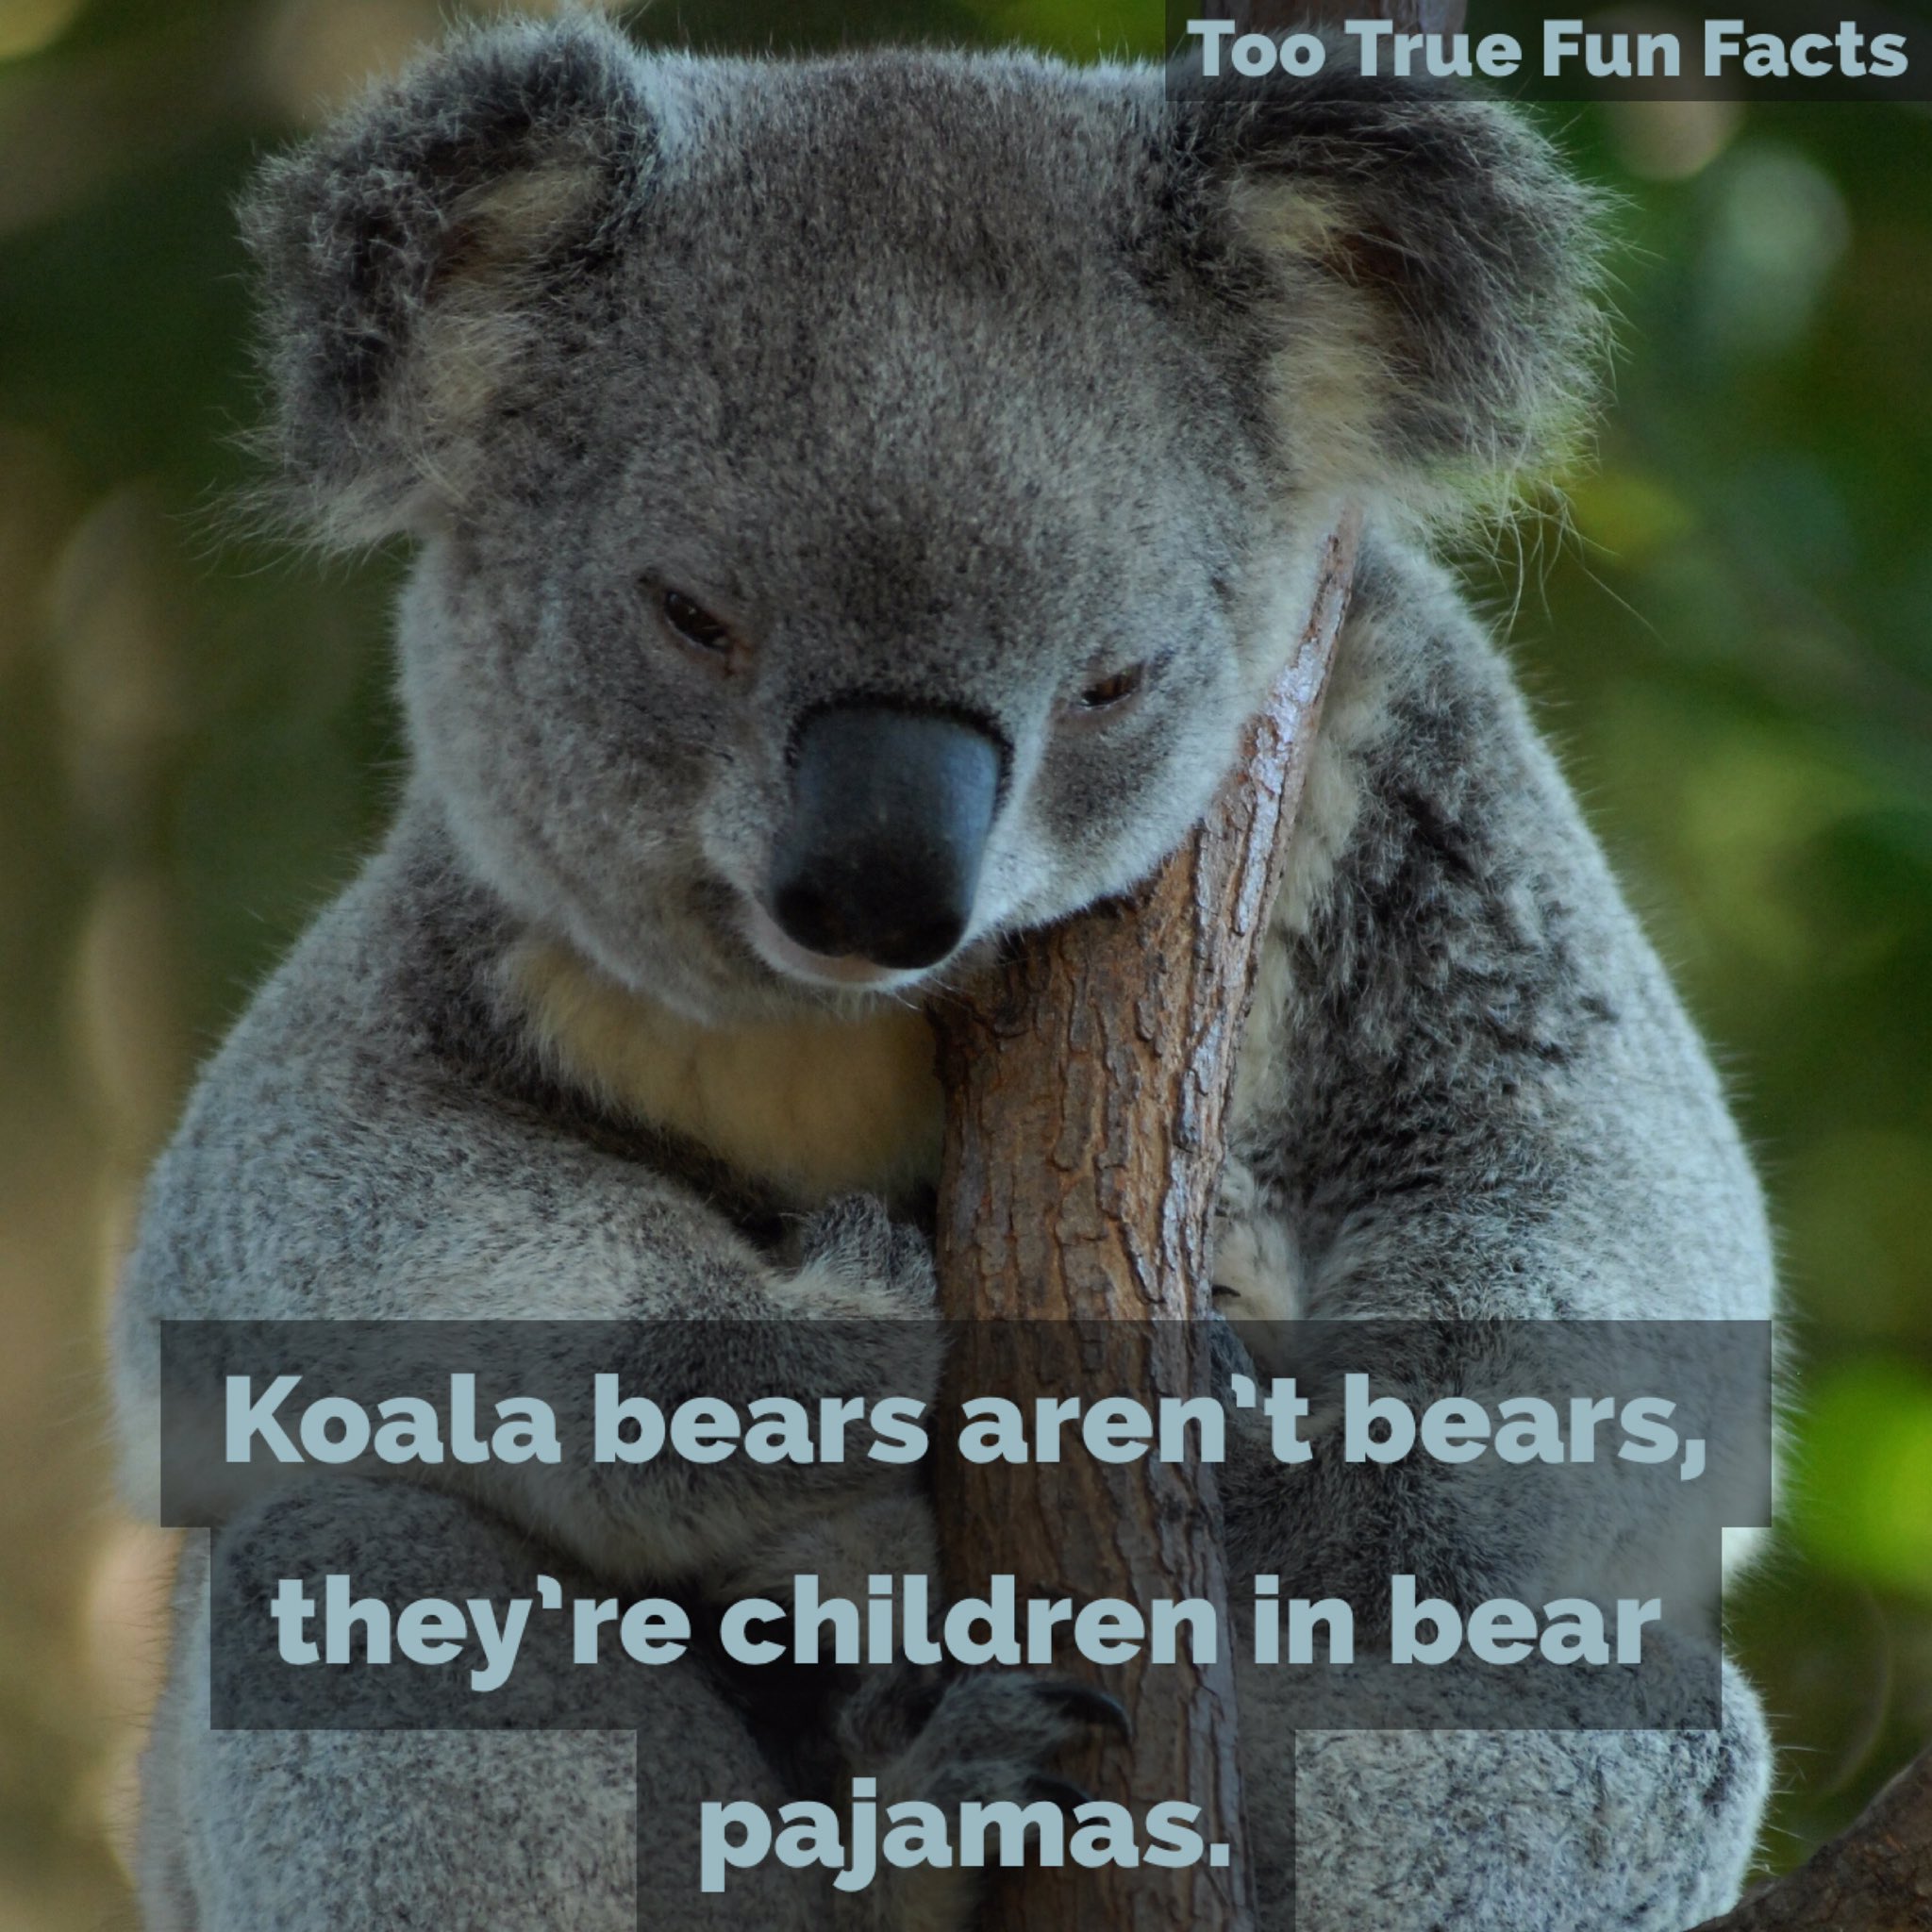 Too True Fun Facts on Twitter: 